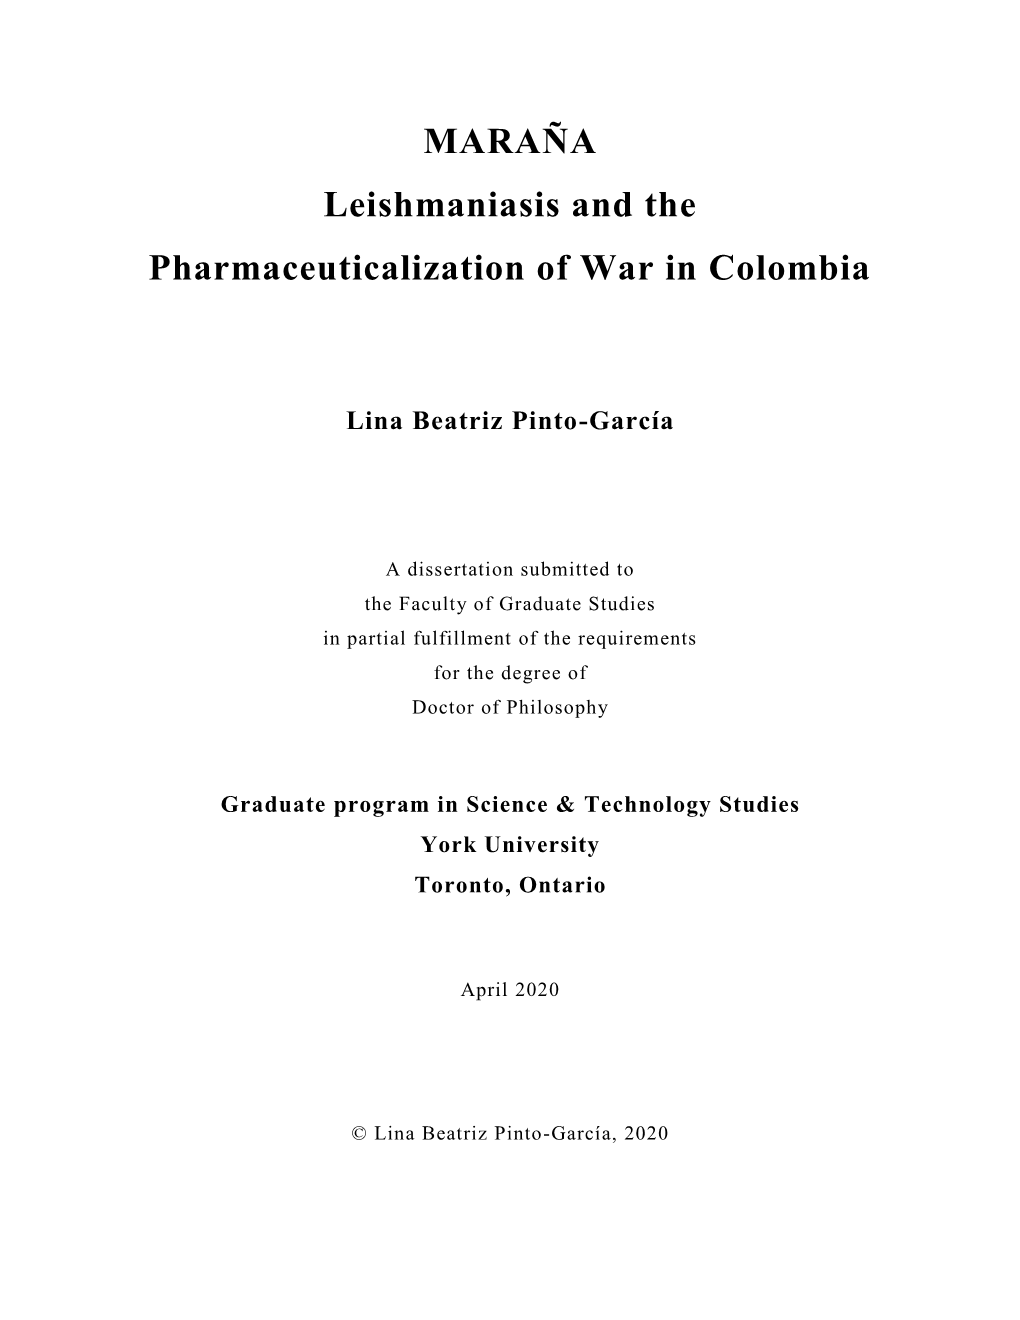 MARAÑA Leishmaniasis and the Pharmaceuticalization of War in Colombia